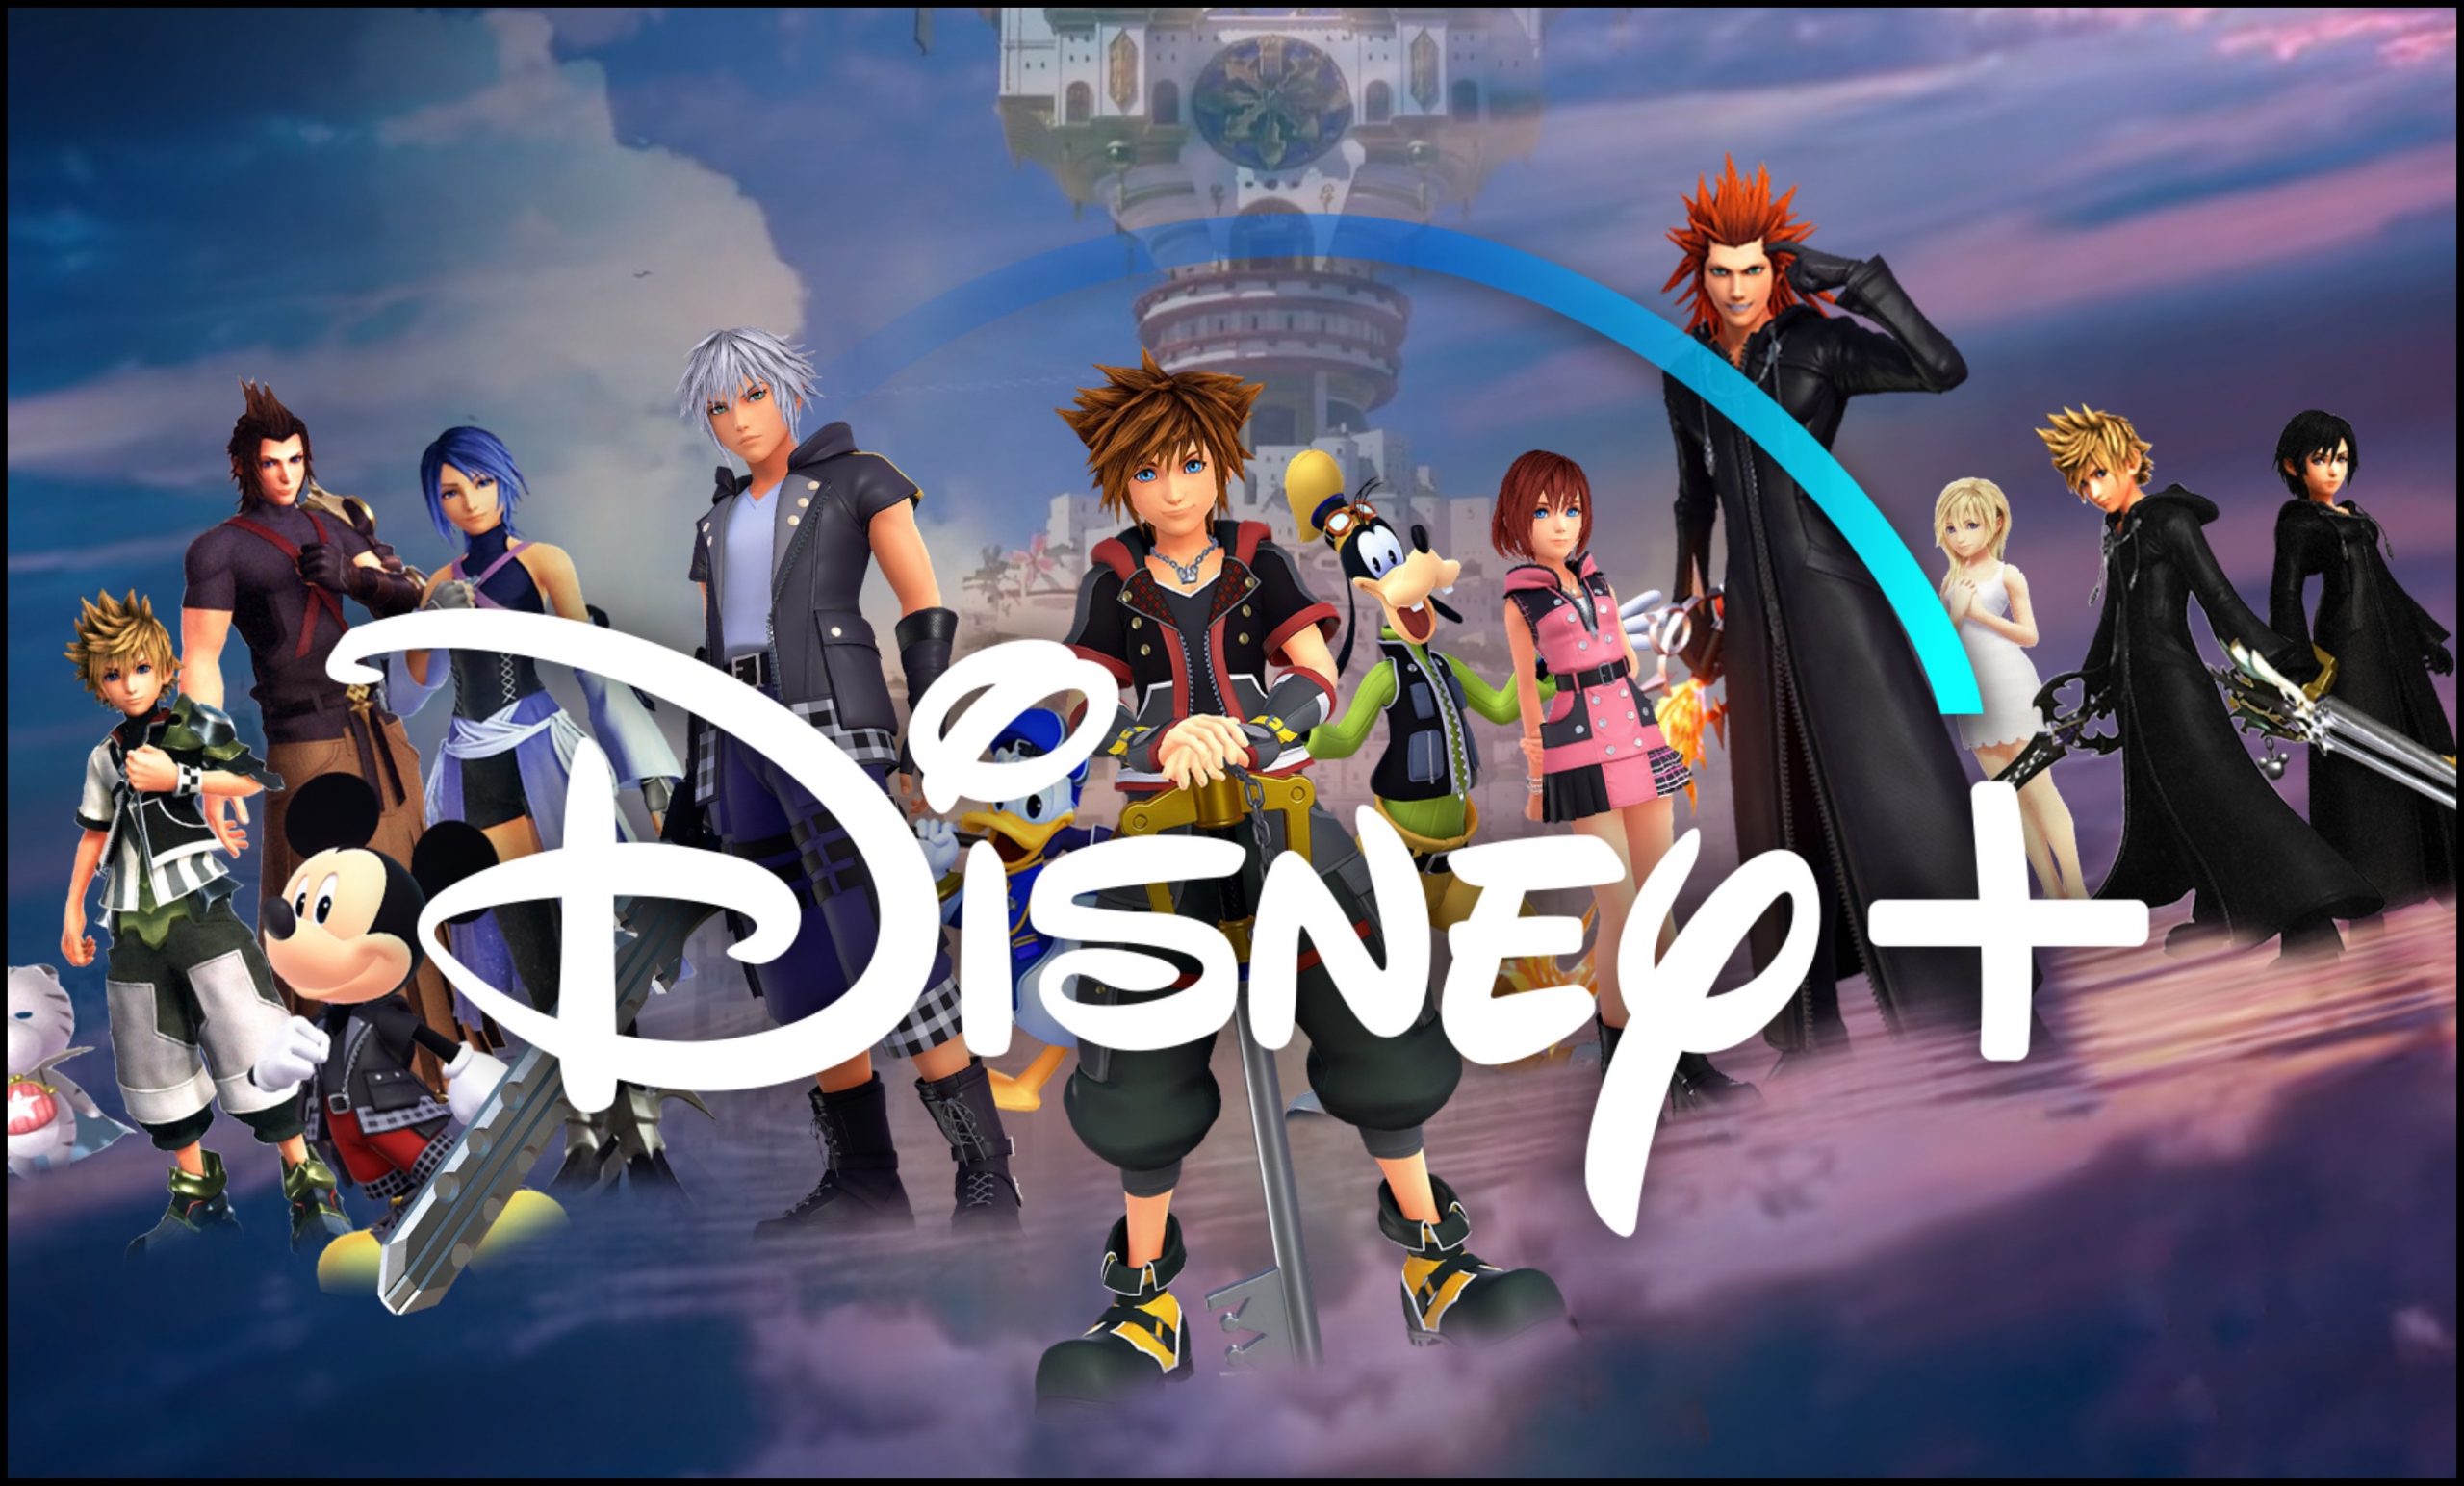 ‘Kingdom Hearts’ Live-Action Series Rumored to be Coming to Disney+